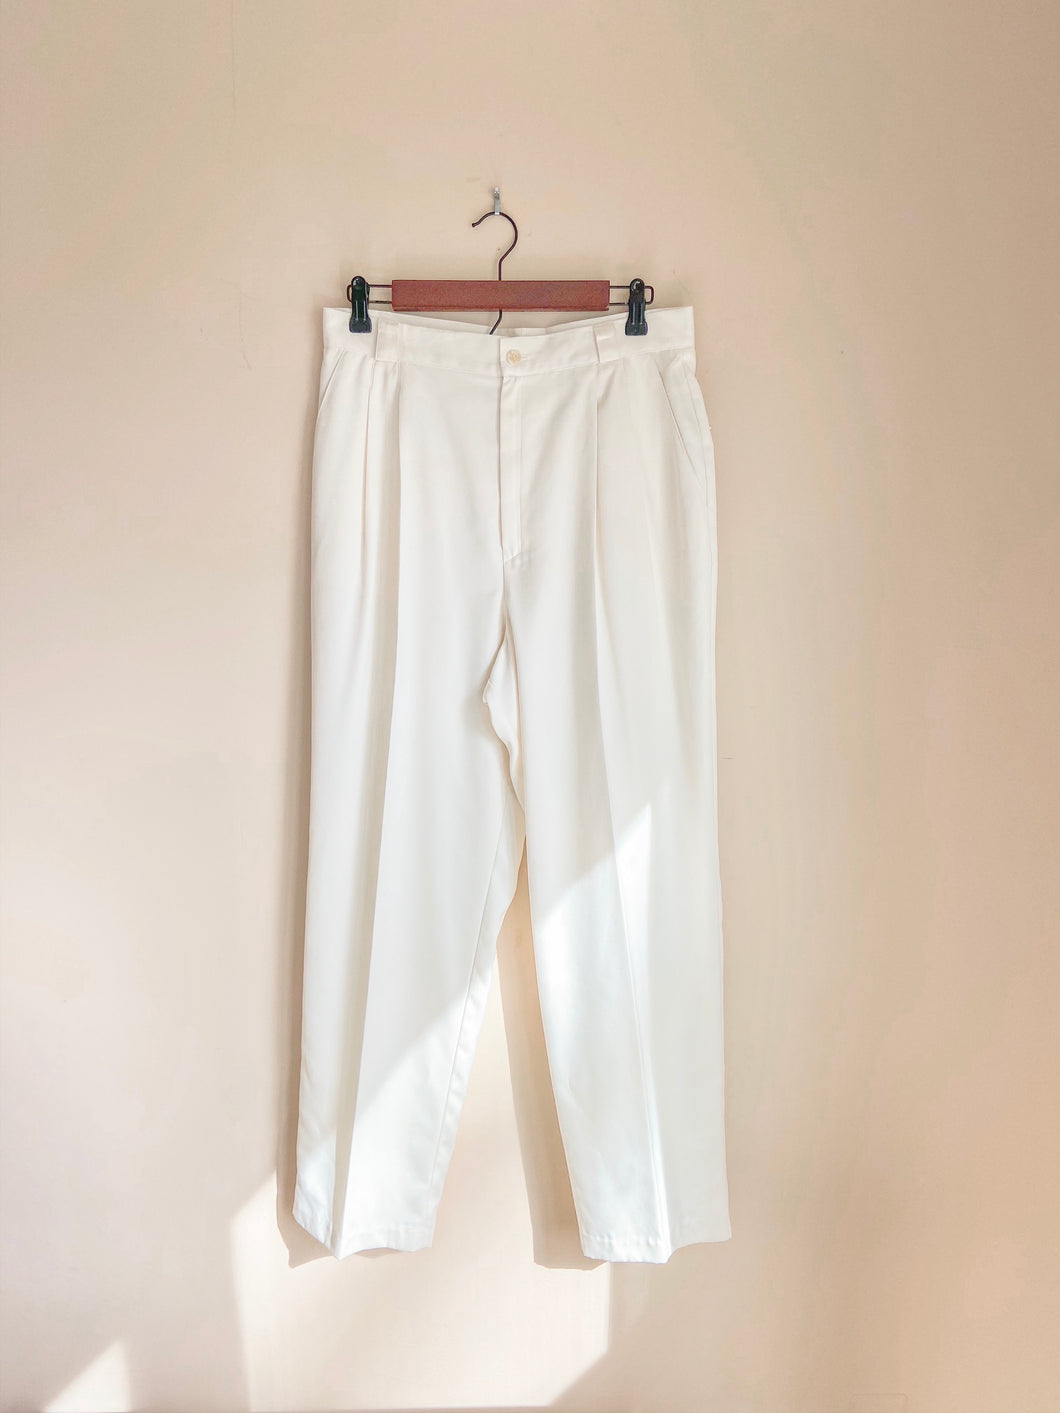 NWT Vintage Pleated Trousers